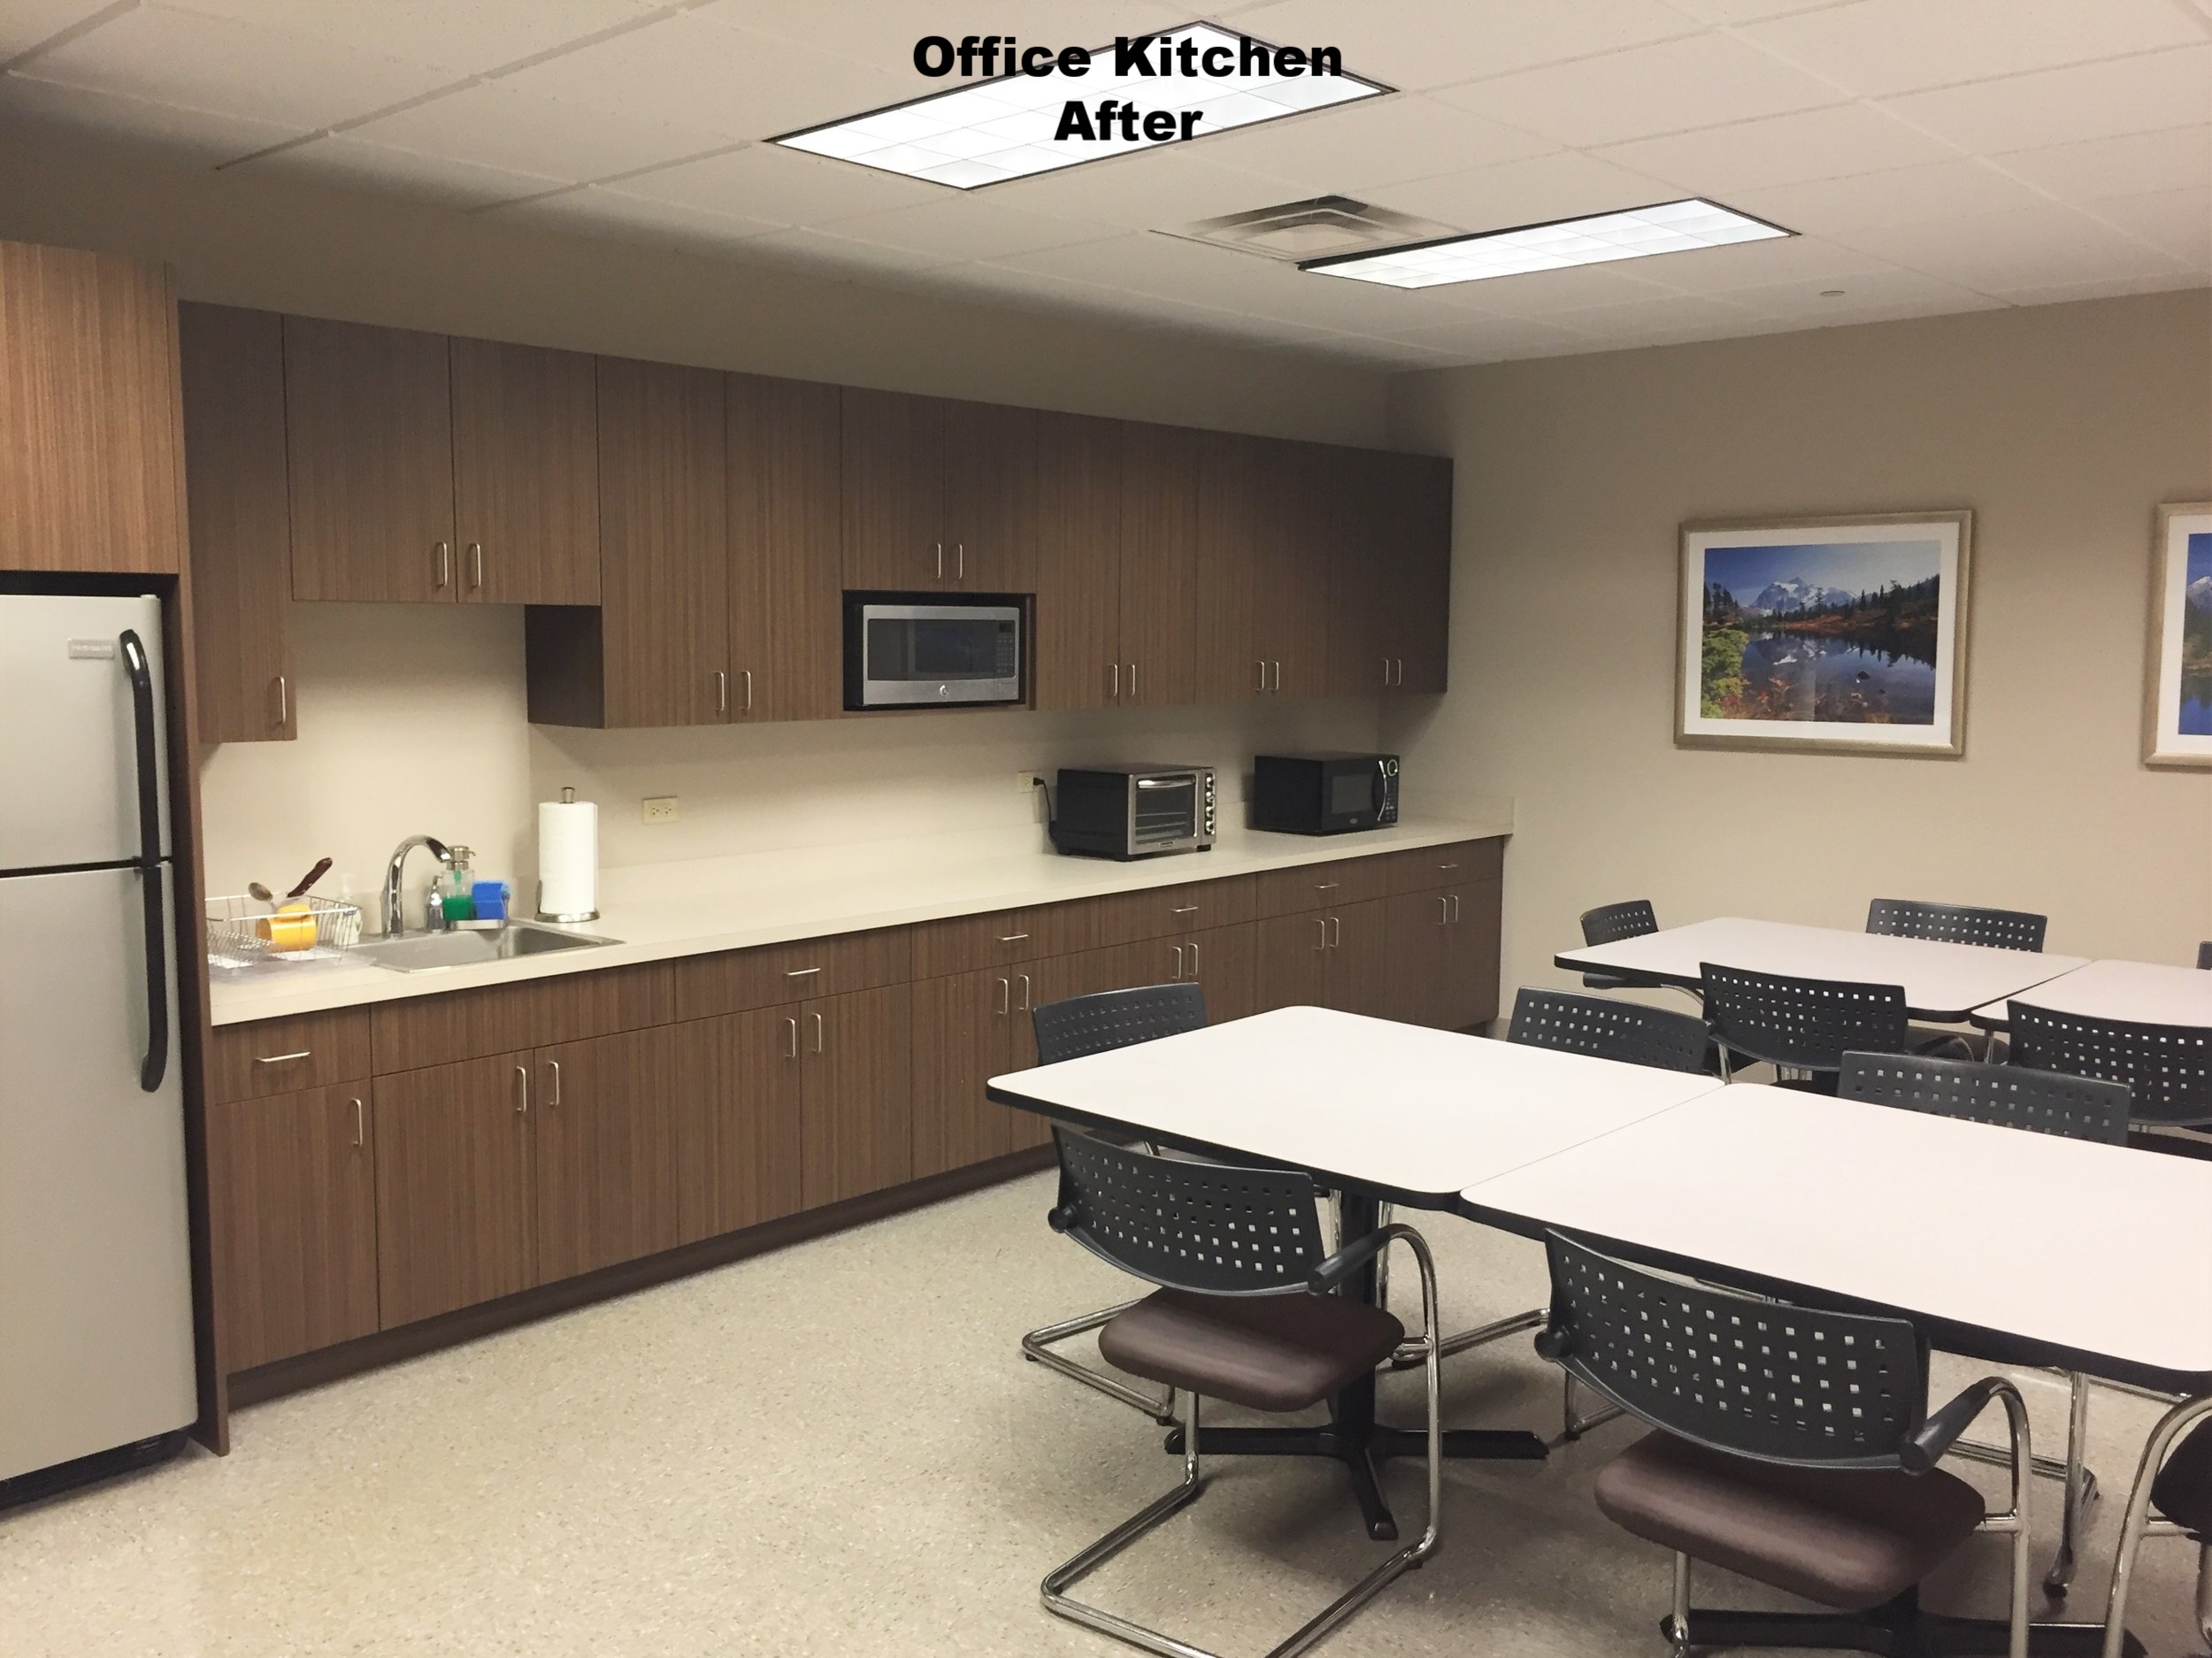 OFFICE KITCHEN AFTER 